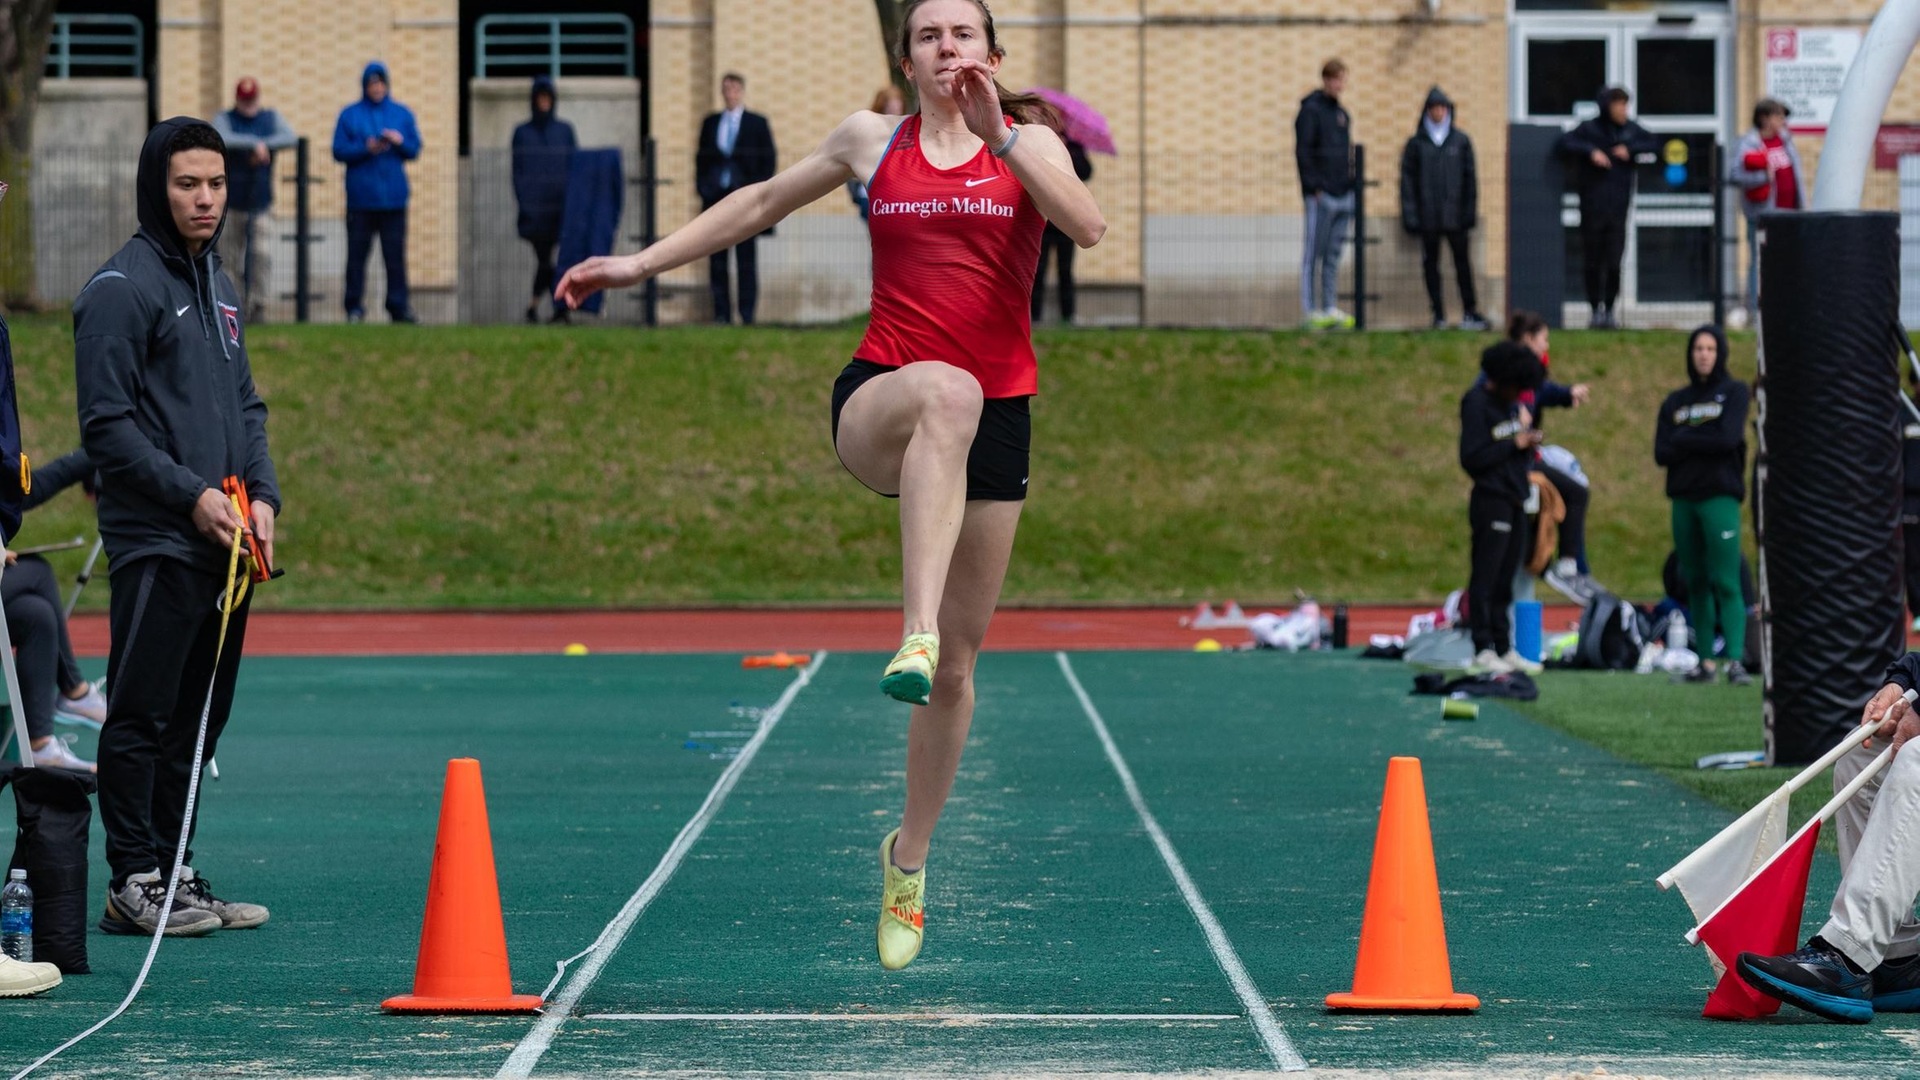 Barre Tops Own School Record in Long Jump at All-Atlantic Regional